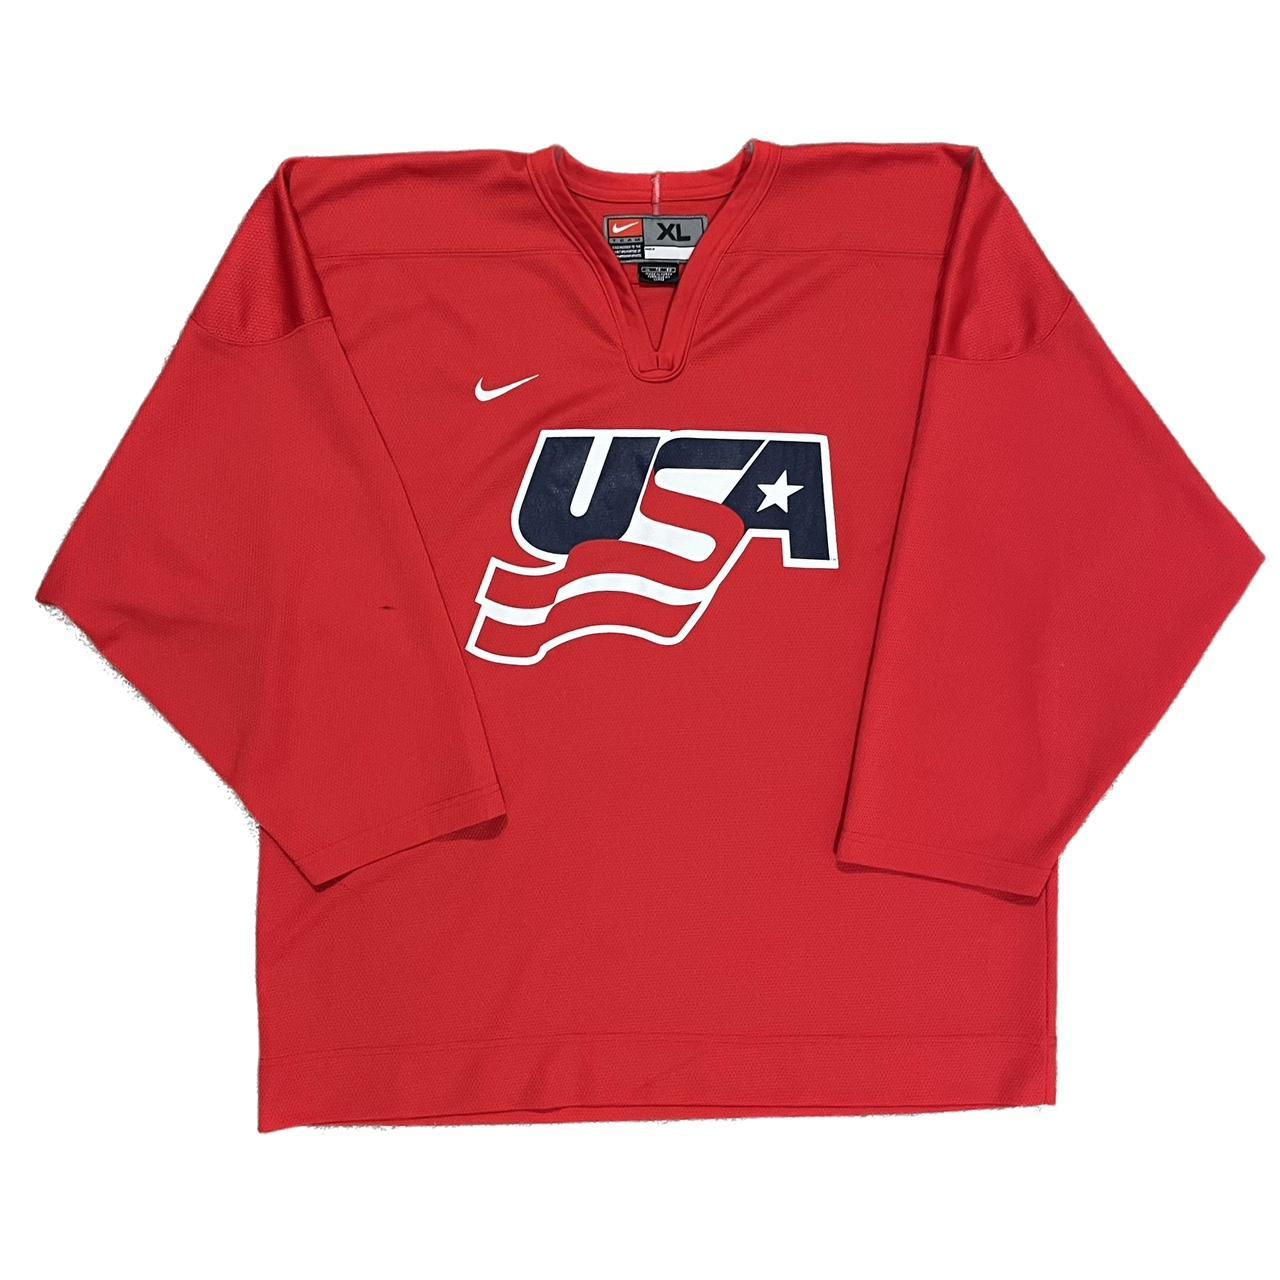 Team USA Nike Red Practice Jersey Size XL Dm for... - Depop